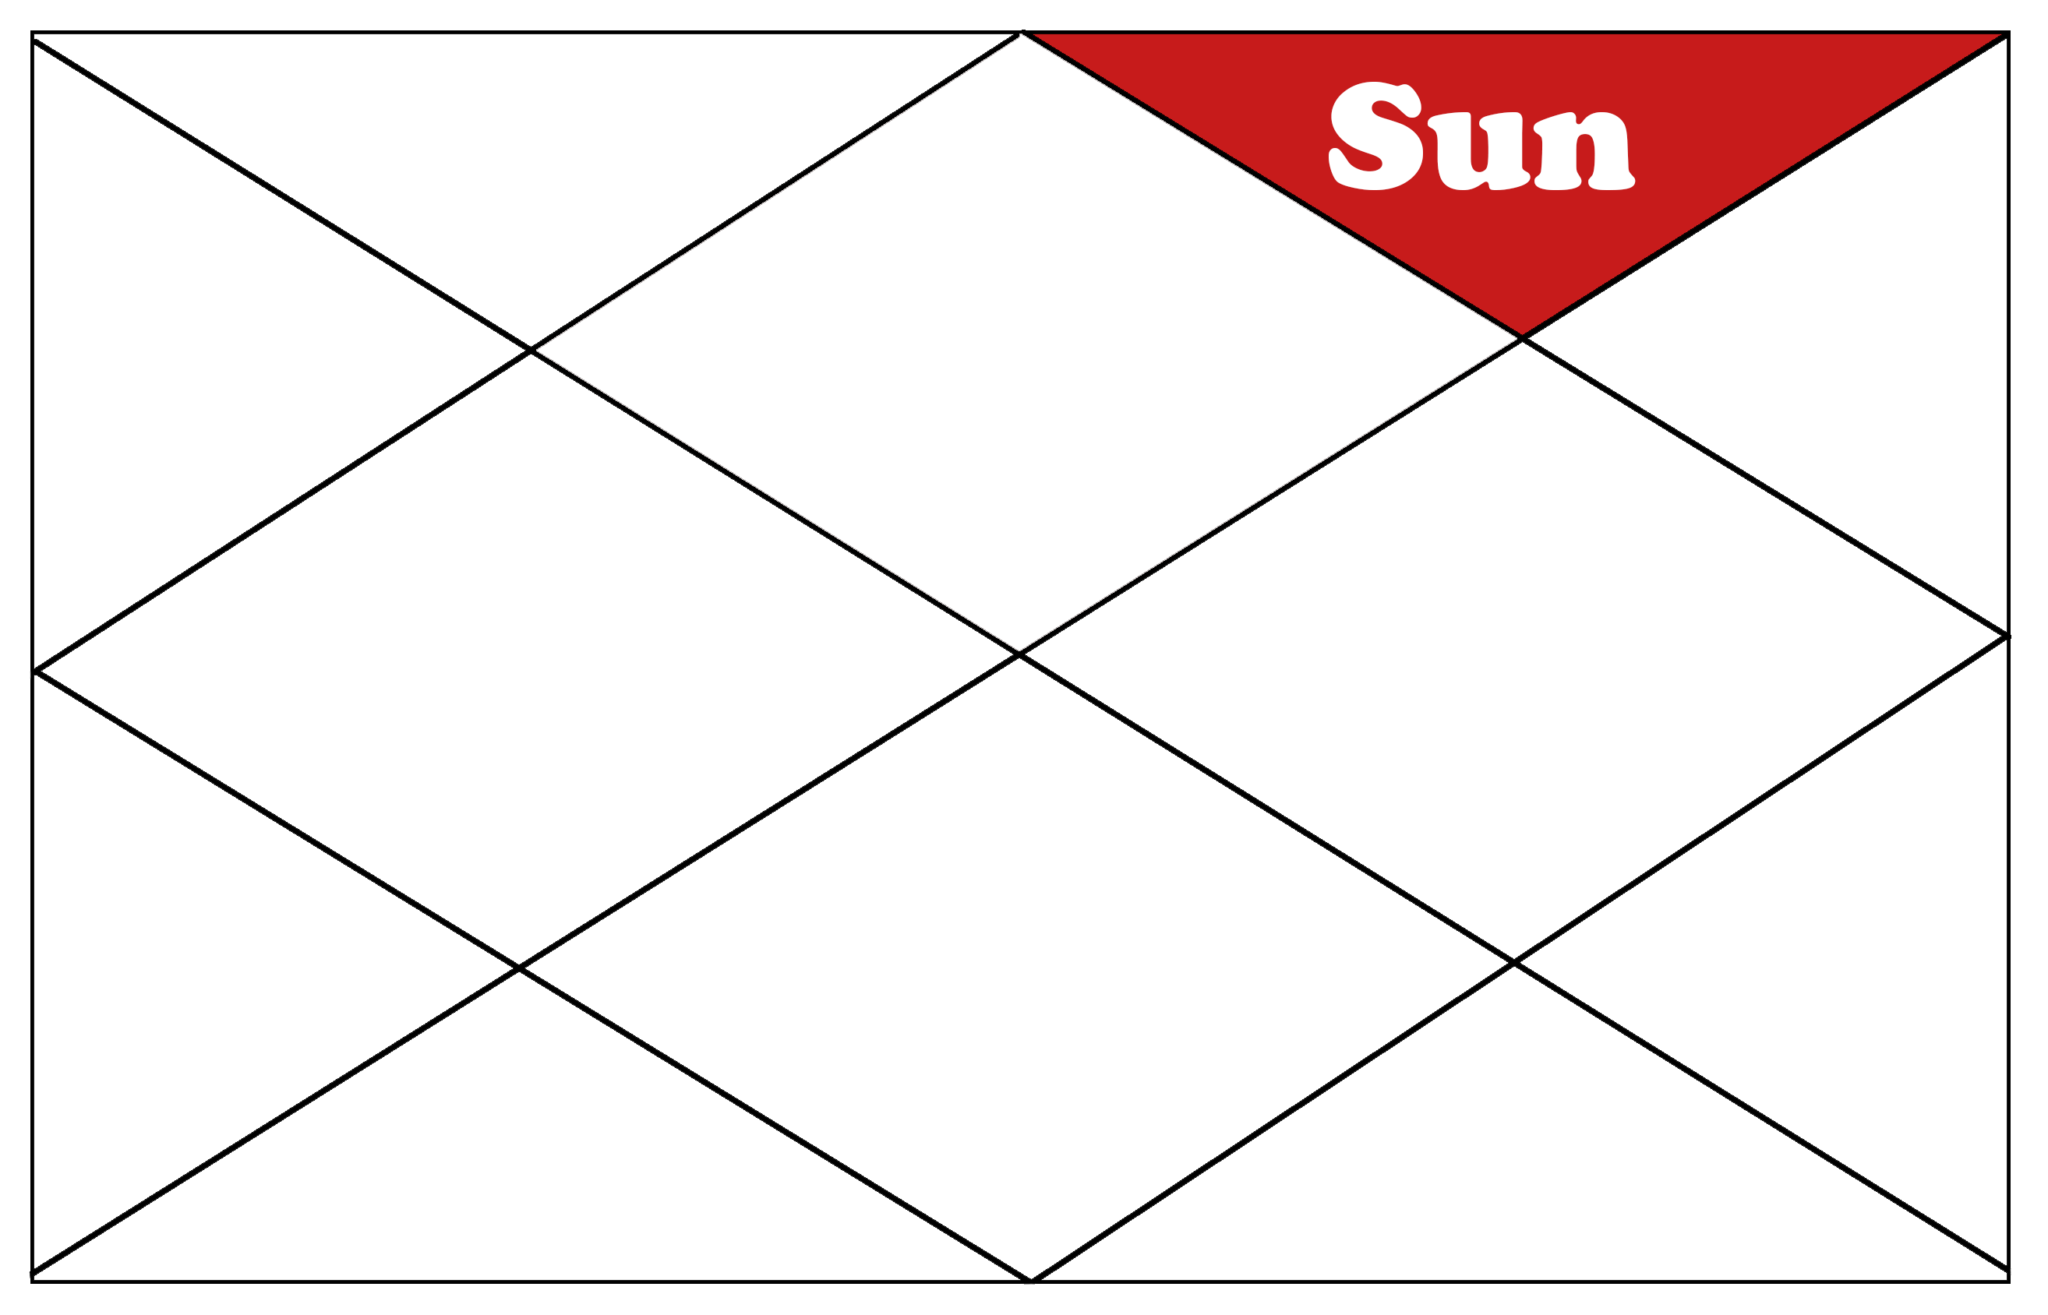 vedic astrology sun in 1st house